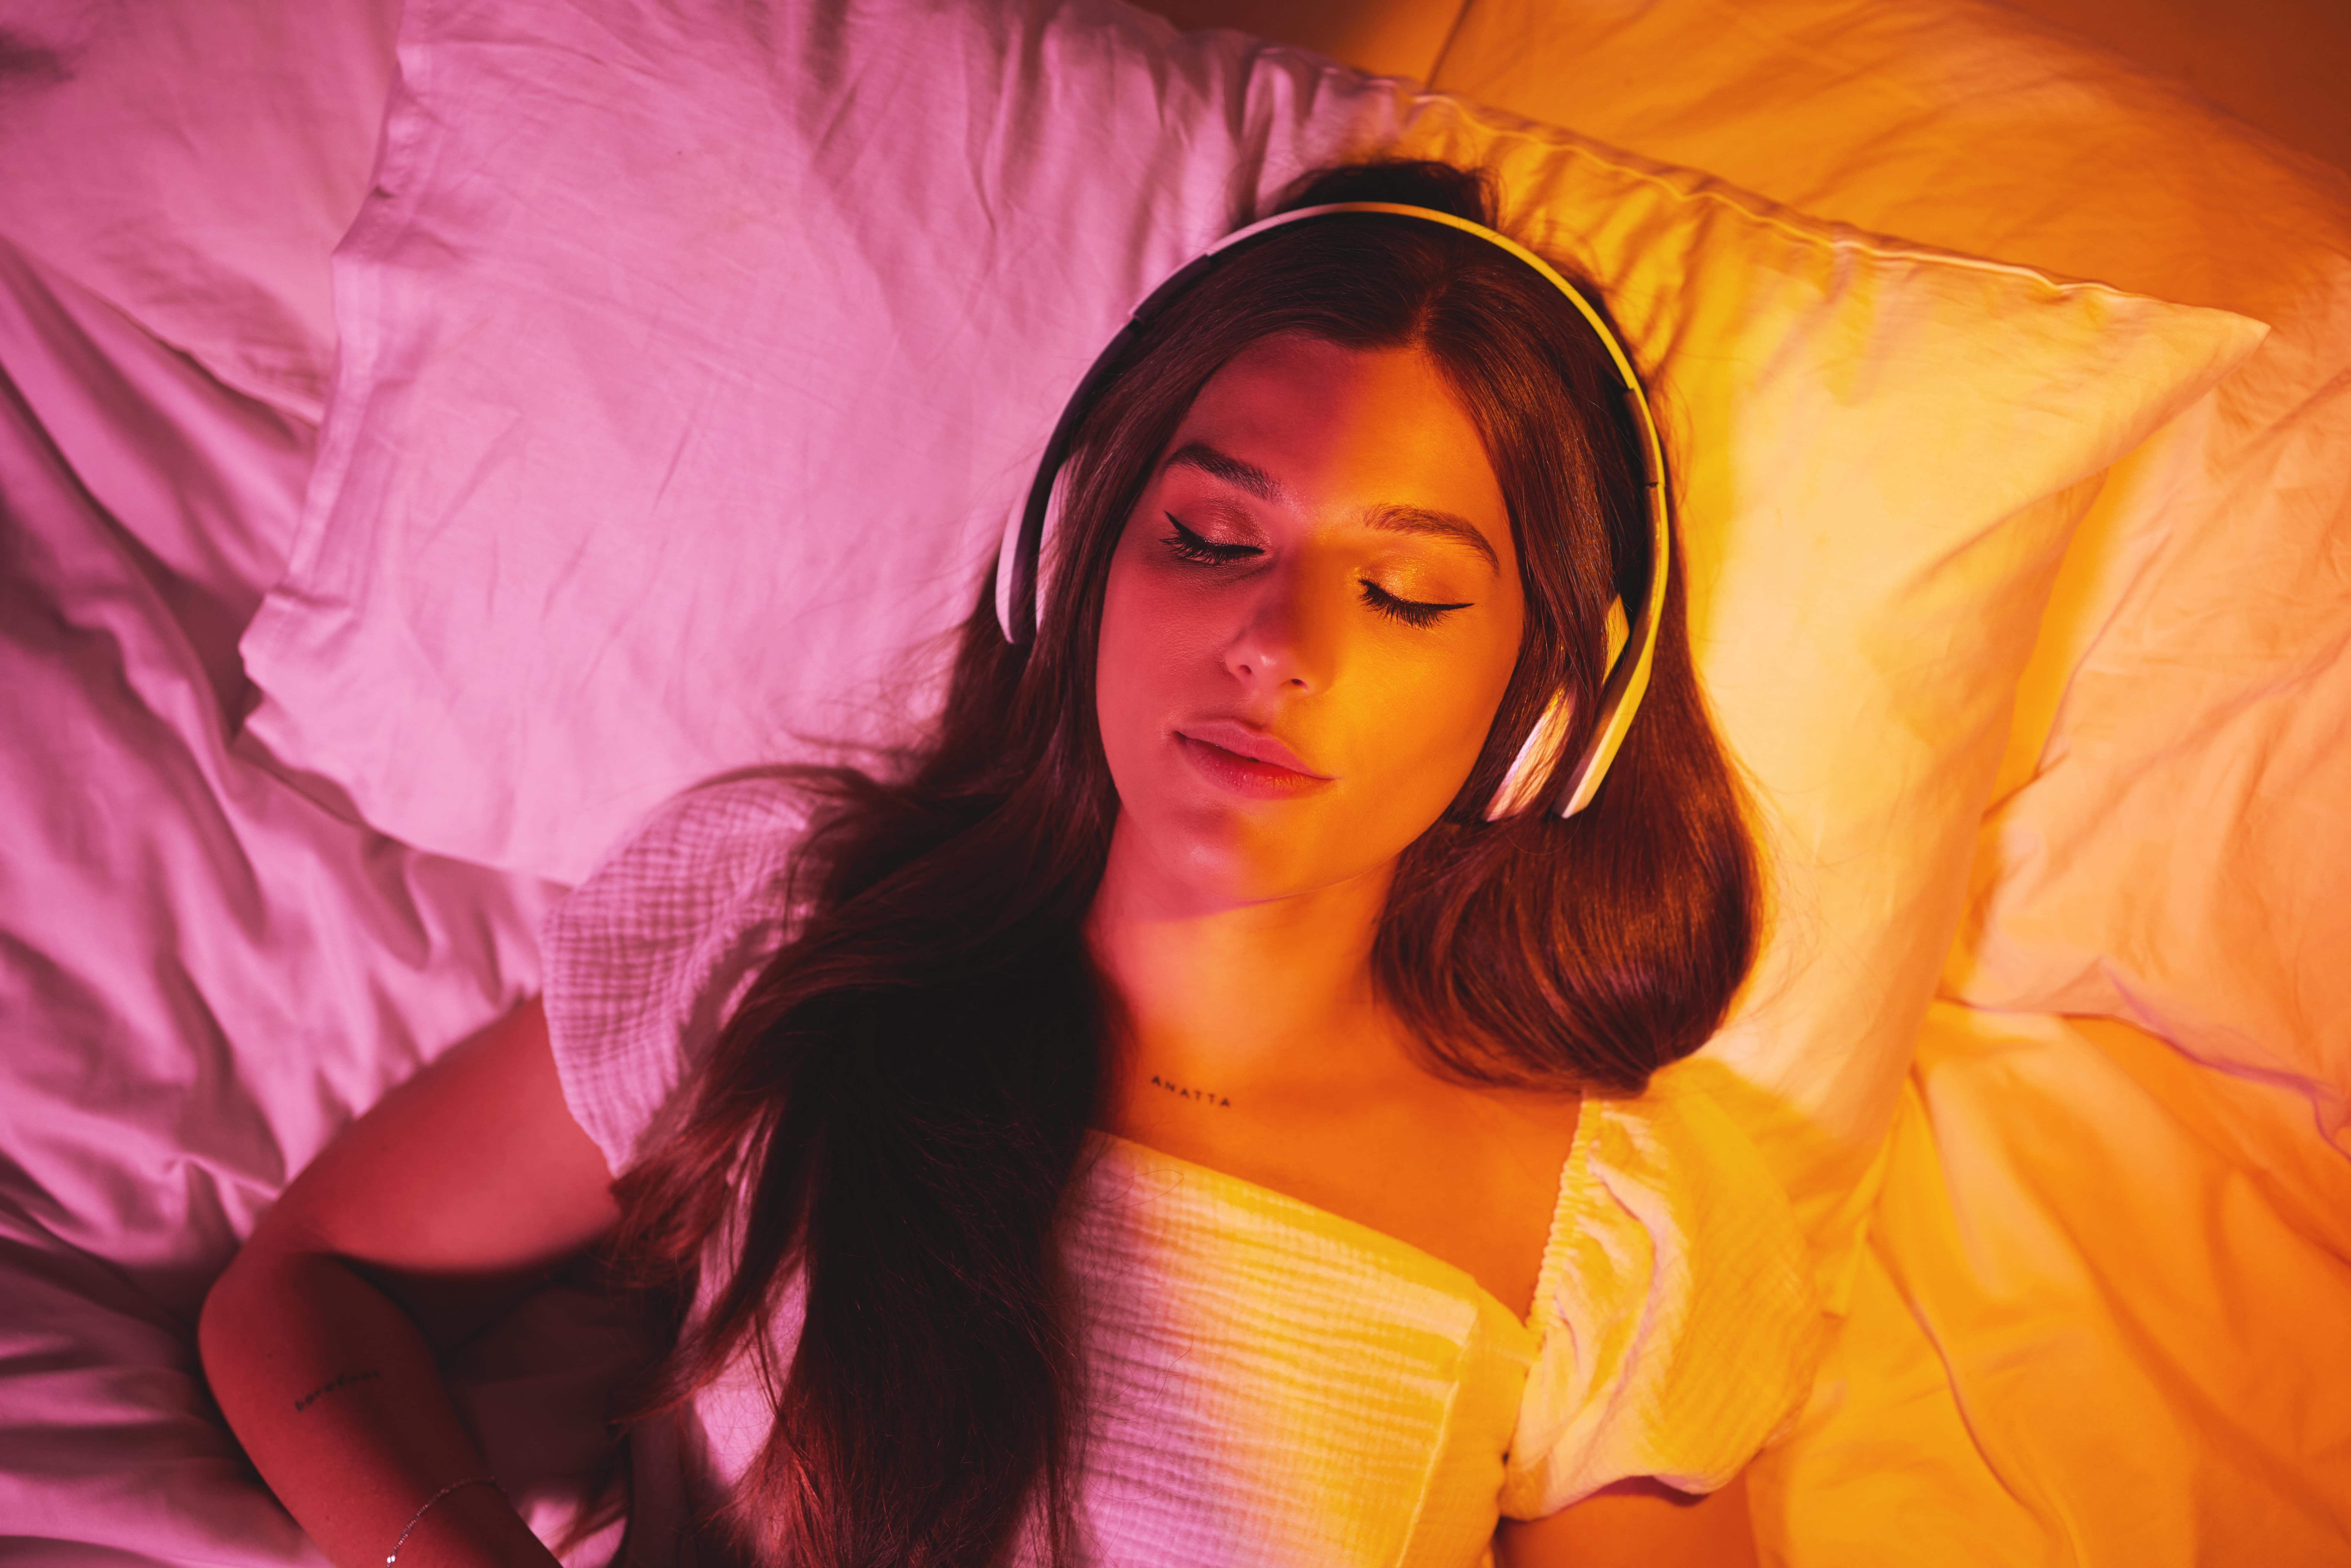 An aerial photo of lady lay on her back on her bed wearing headphones to listen to music while she sleeps. There is a pink and orange glow from lighting across the entire image.